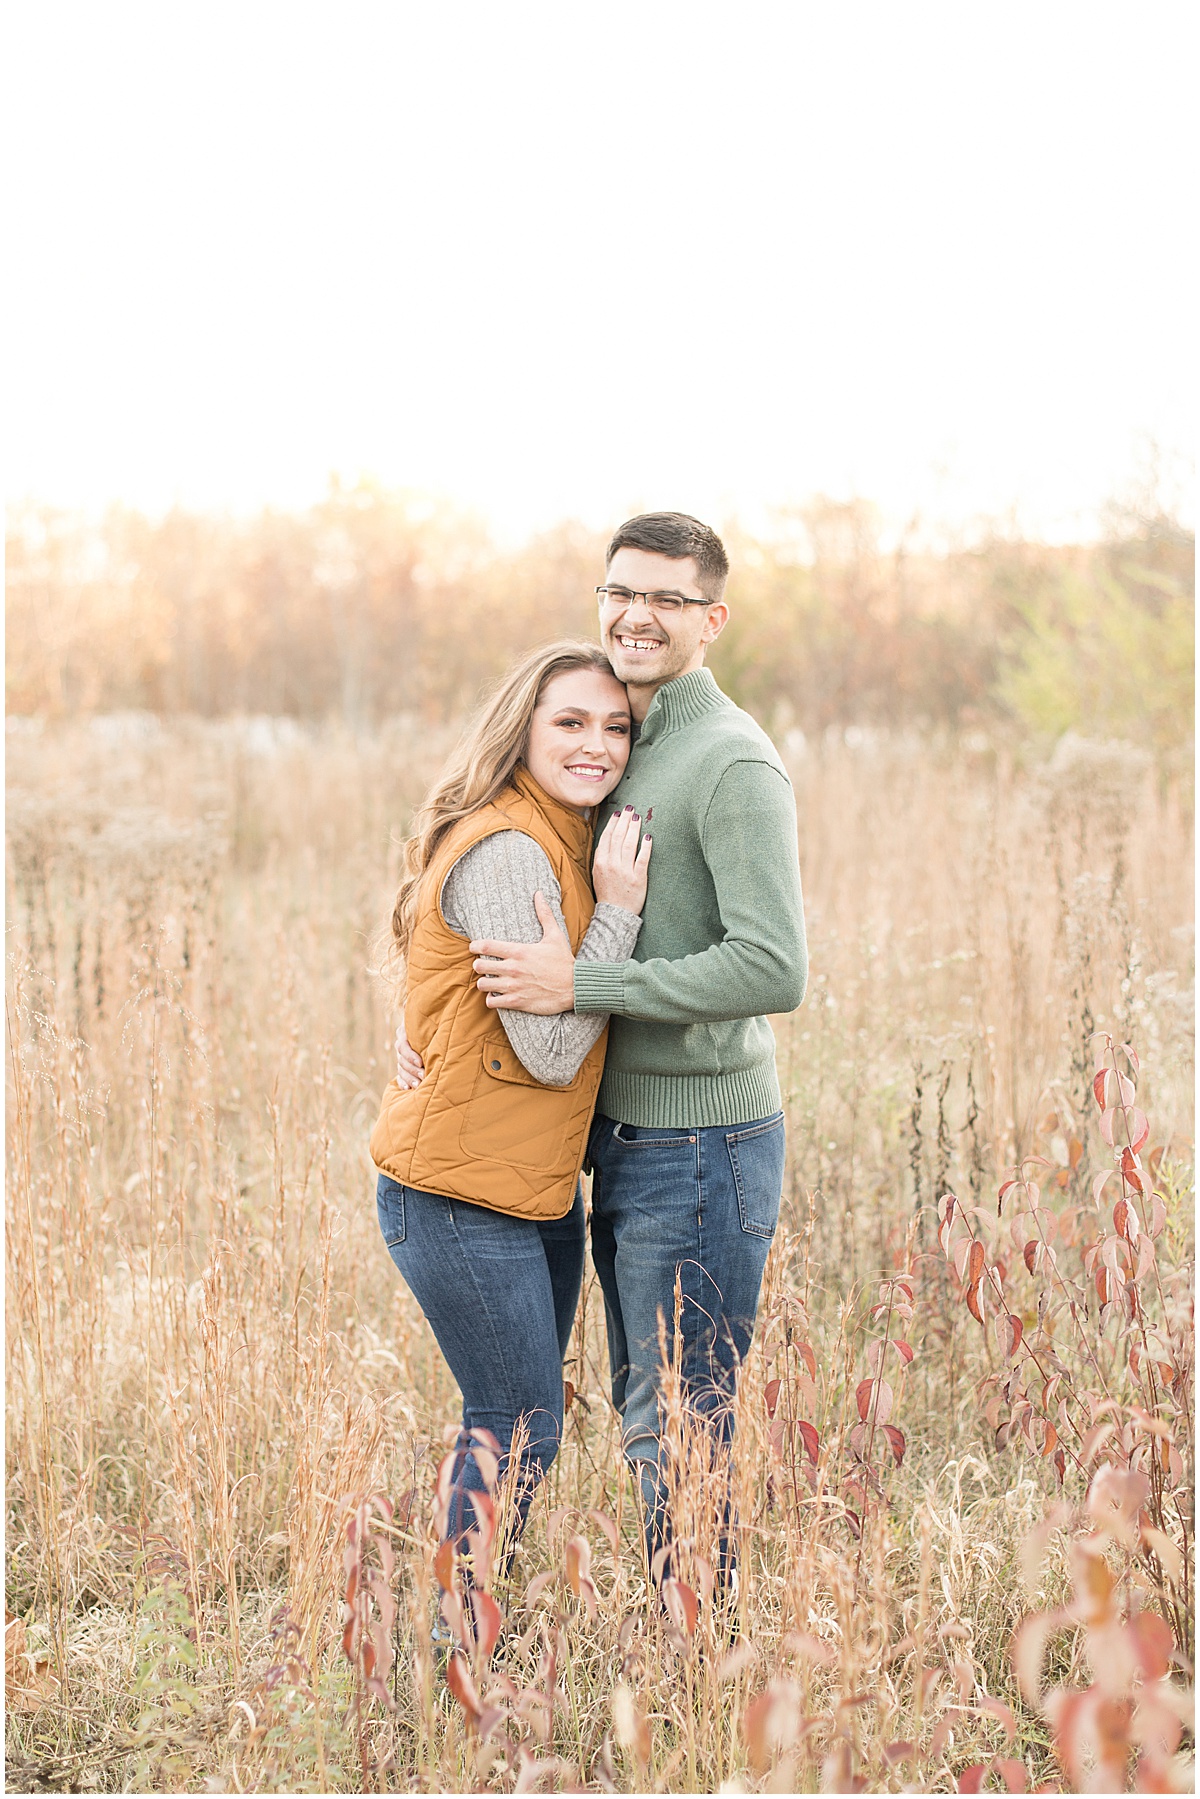 Fall engagement photos at Fairfield Lakes Park in Lafayette, Indiana by Victoria Rayburn Photography